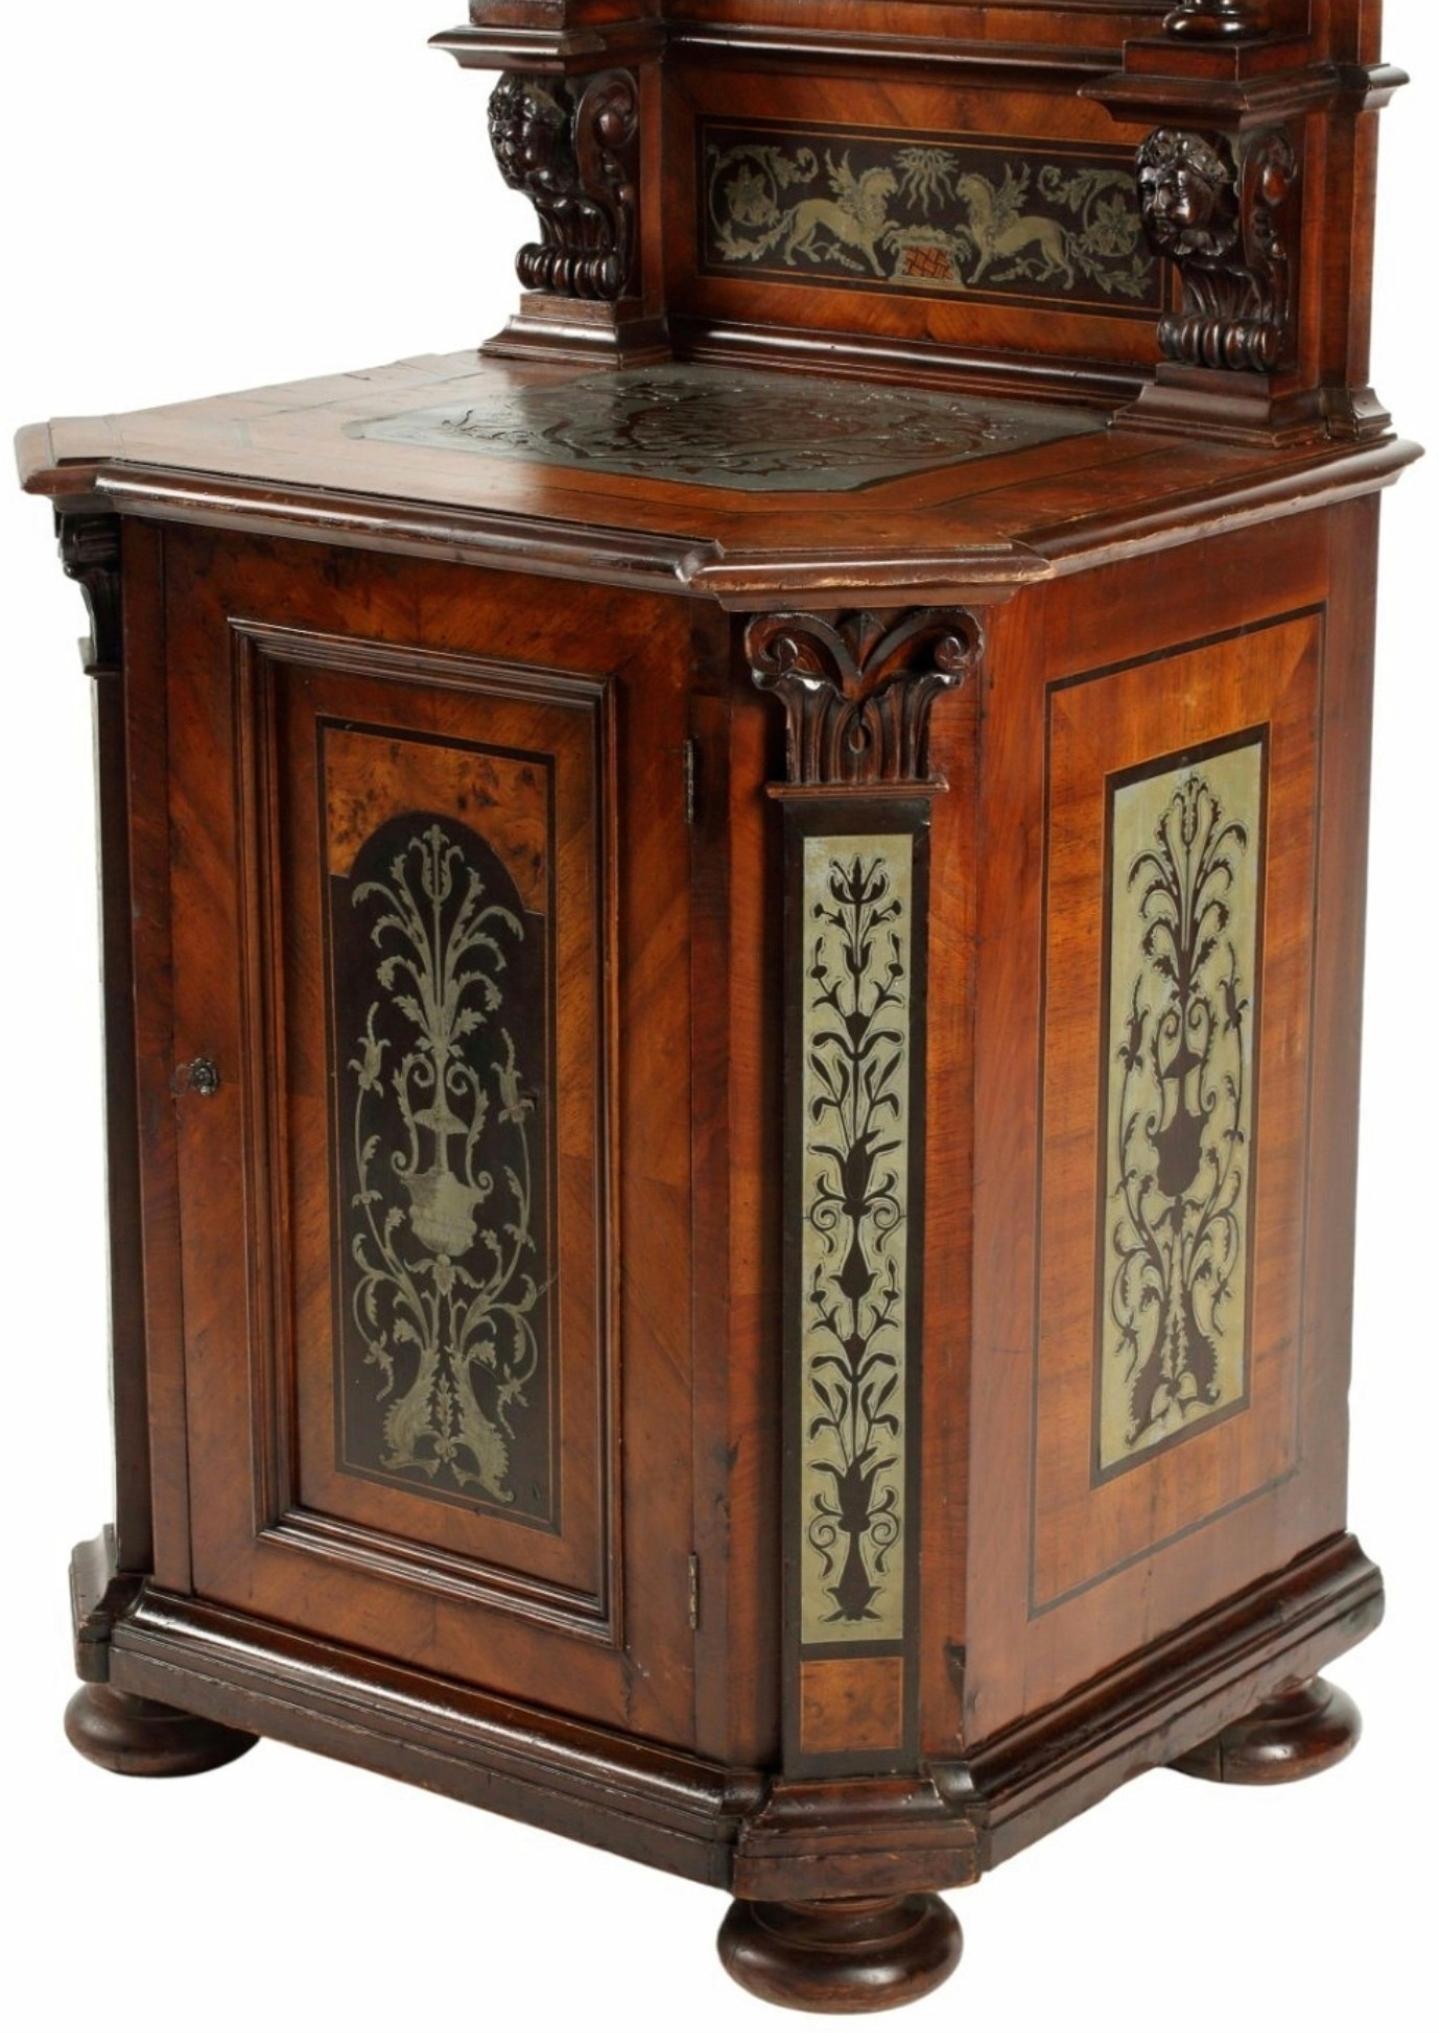 Fine European Renaissance Revival Hand-Carved Pewter Inlaid Cabinet  In Good Condition For Sale In Forney, TX